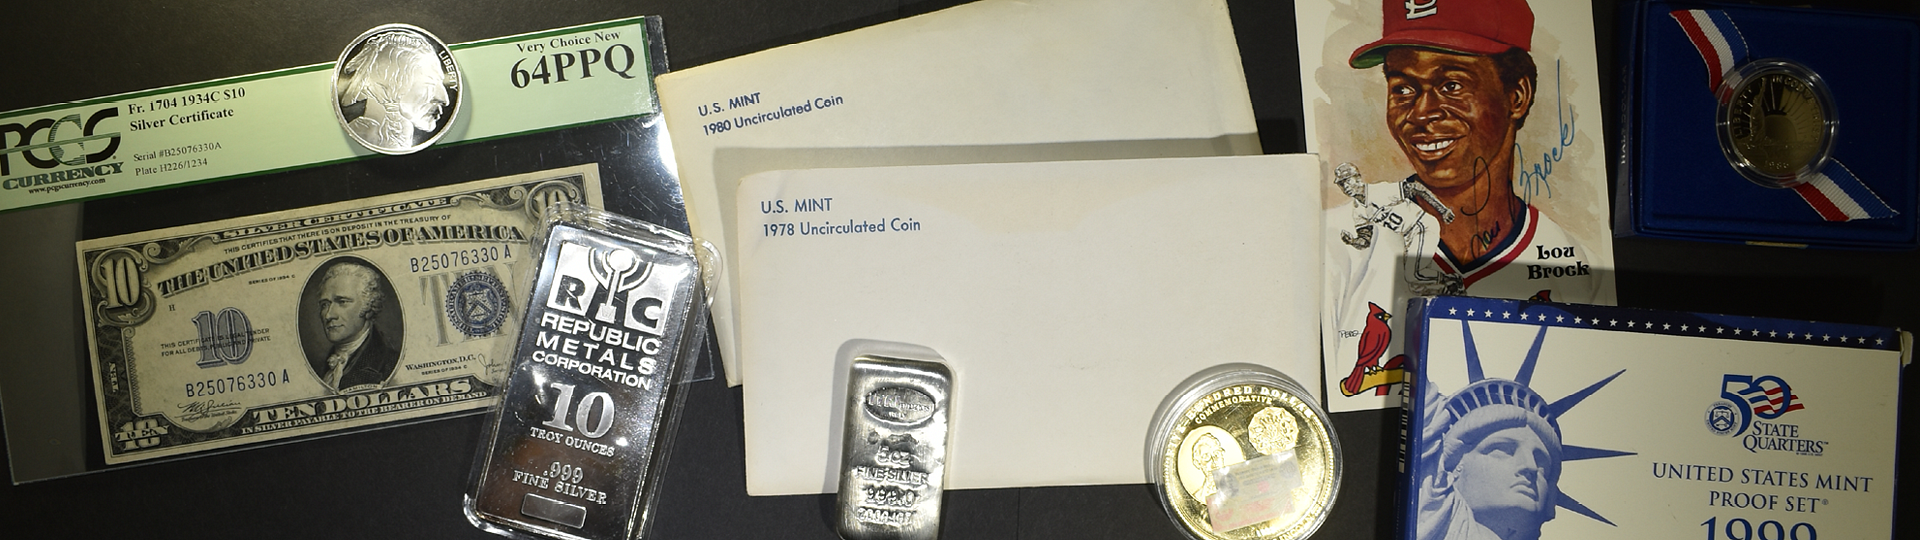 August 16th Silver City Rare Coin & Currency Auction by Silver City Auctions